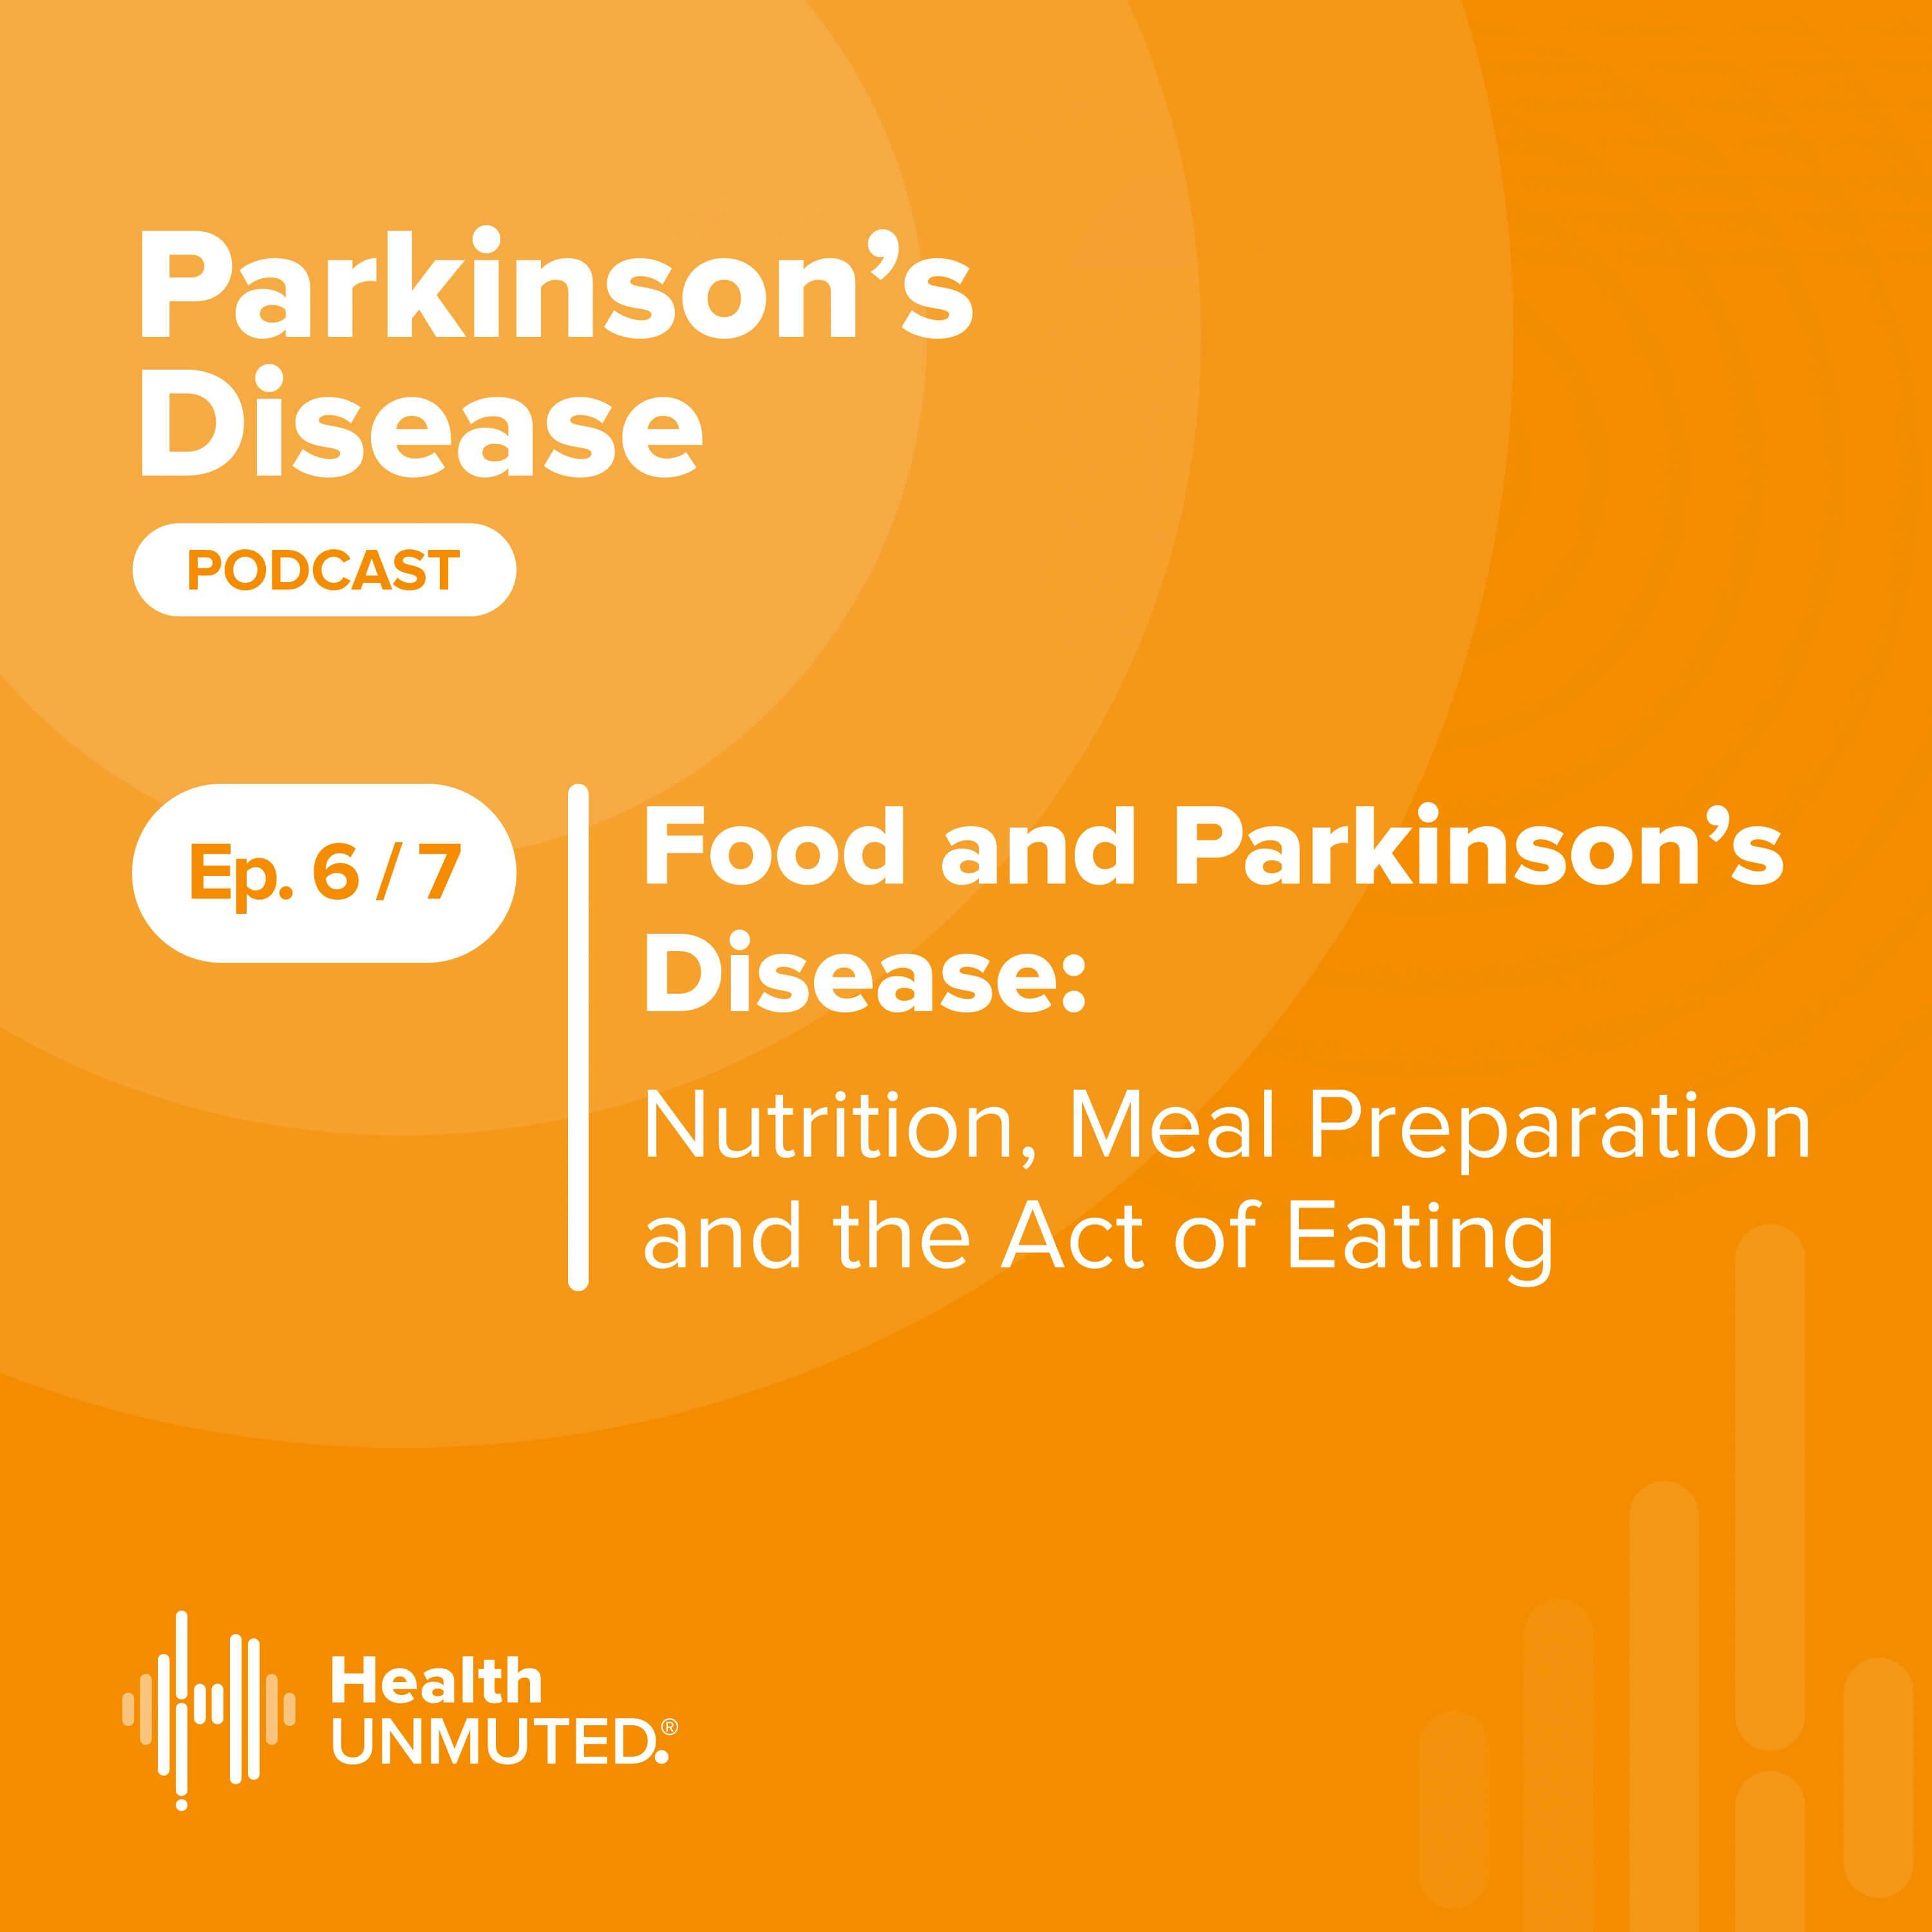 Ep 6: Food and Parkinson’s Disease: Nutrition, Meal Preparation and the Act of Eating